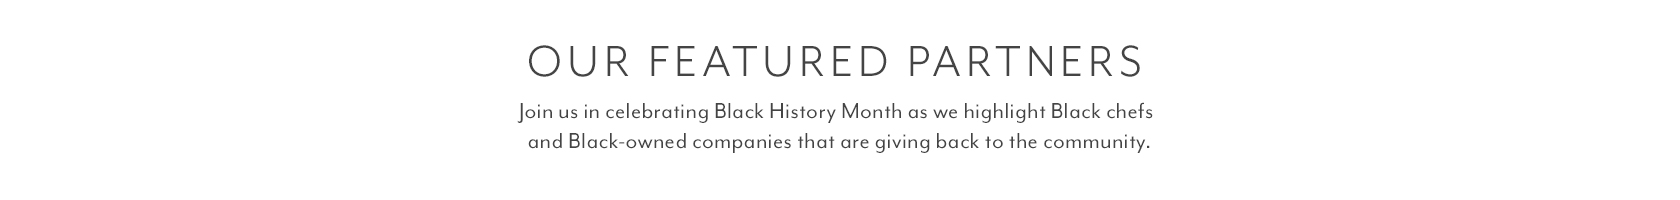 OUR FEATURED PARTNERS. Join us in celebrating Black History Month as we highlight Black chefs and Black-owned companies that are giving back to the community.